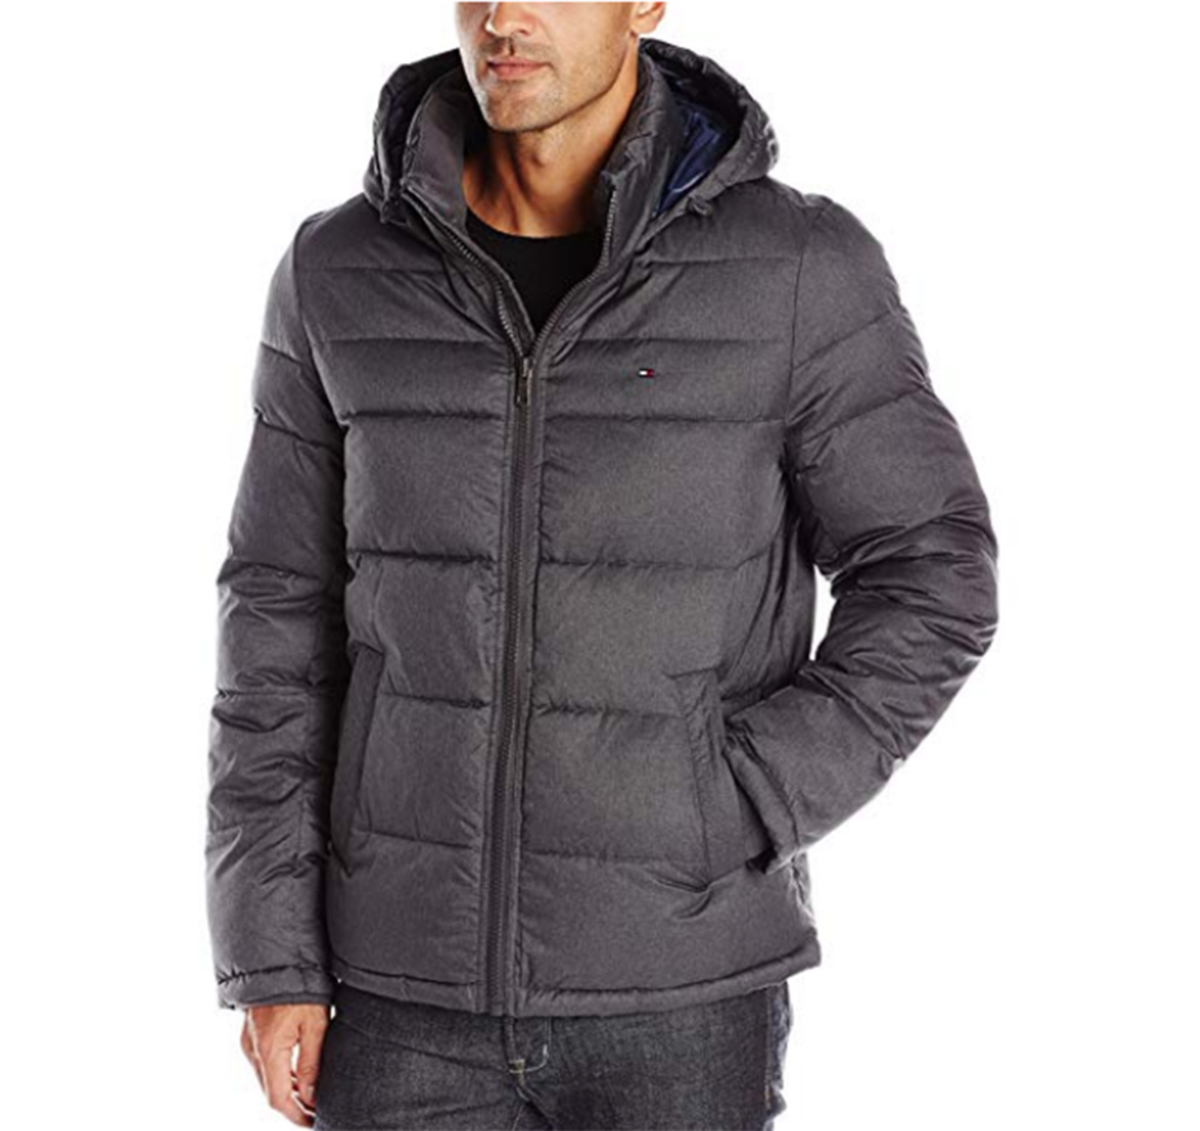 9 Great Jackets On Sale For Every Man This Winter Season - Men's Journal